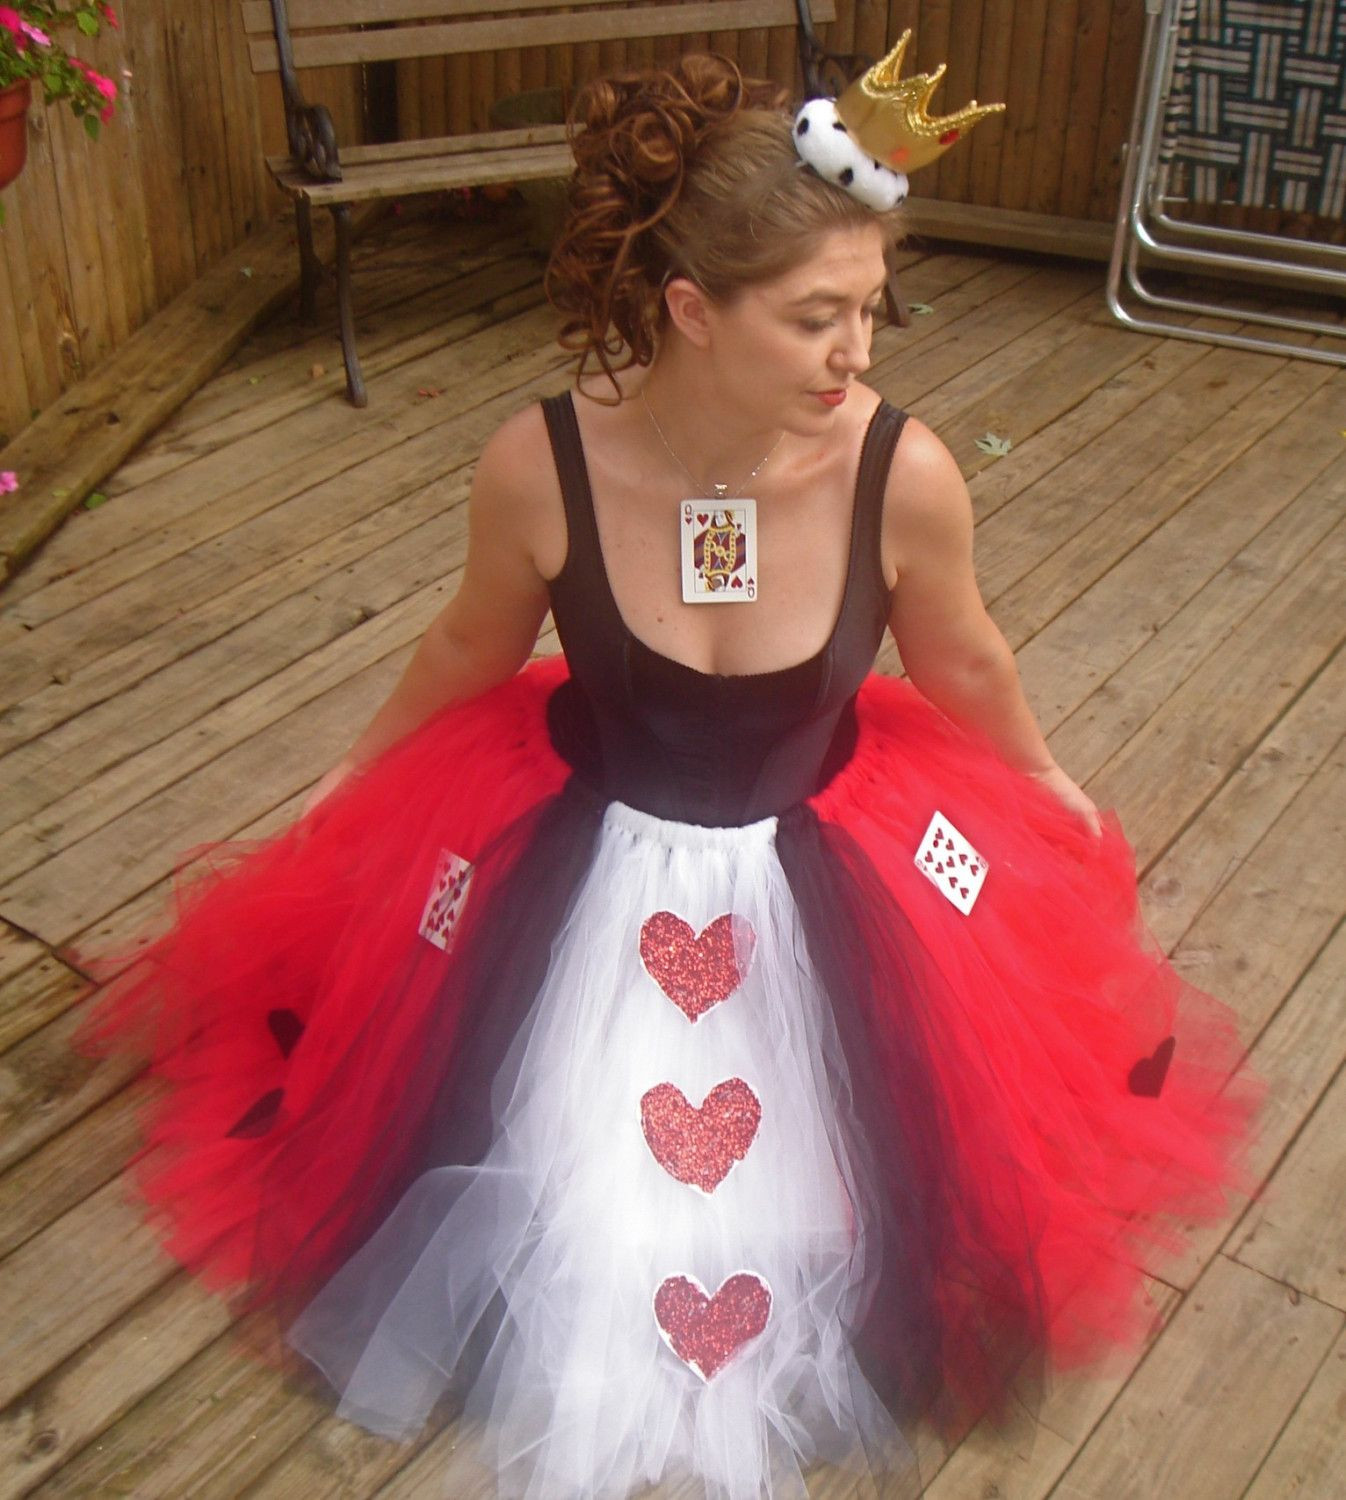 Tutu Skirts For Adults DIY
 Queen of Hearts Adult Boutique Tutu Skirt Costume